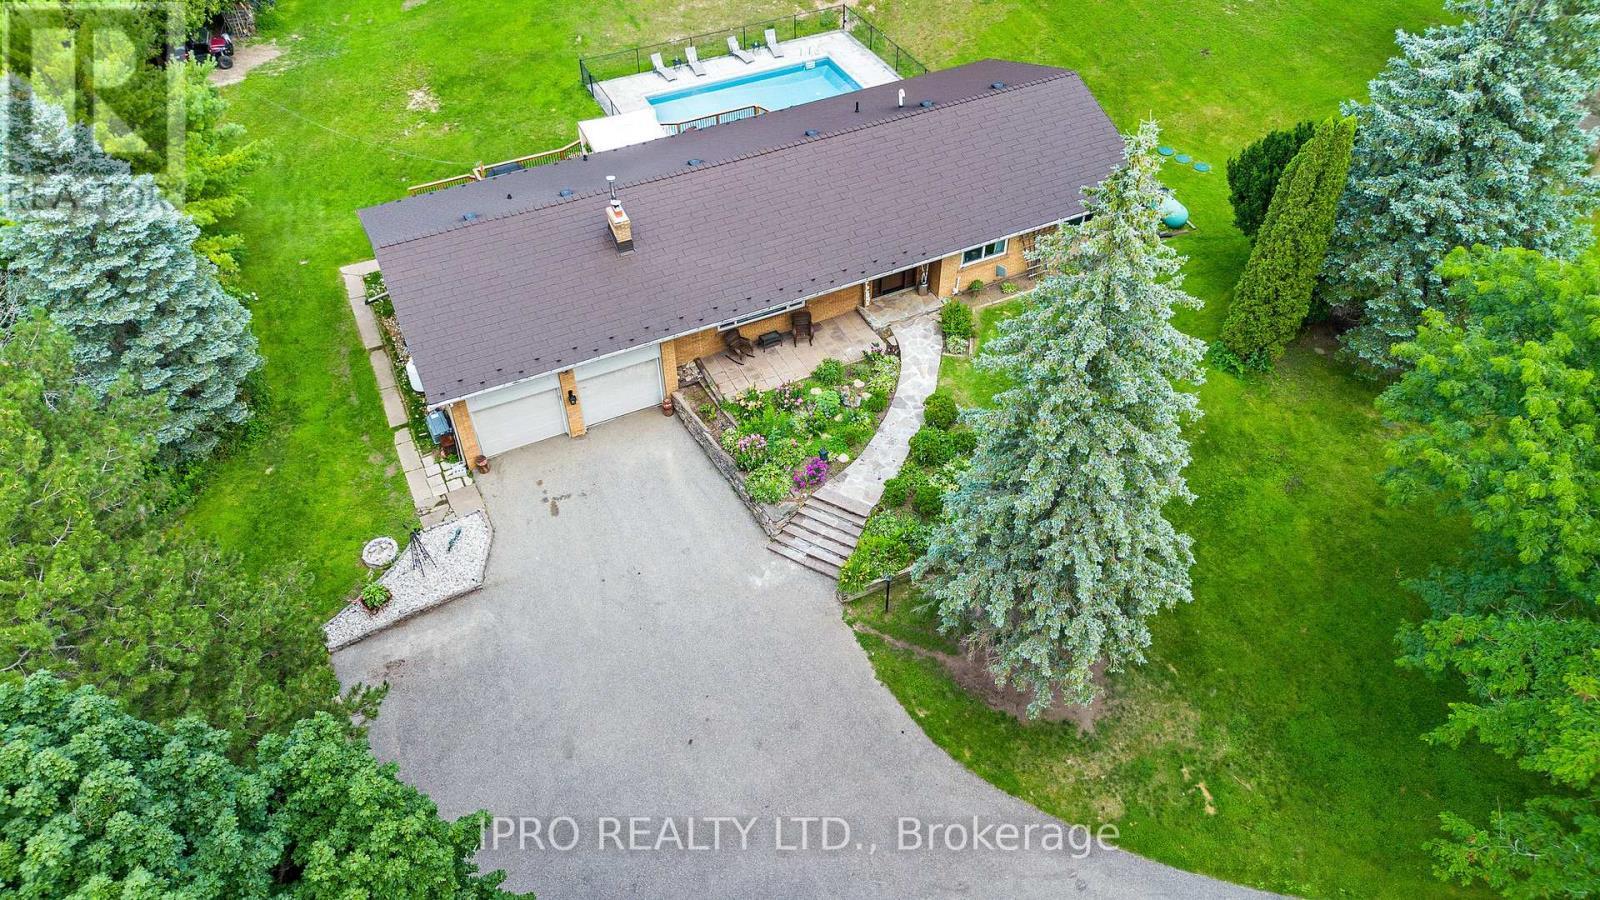 












19997 WILLOUGHBY RD

,
Caledon,




Ontario
L7K1W1

